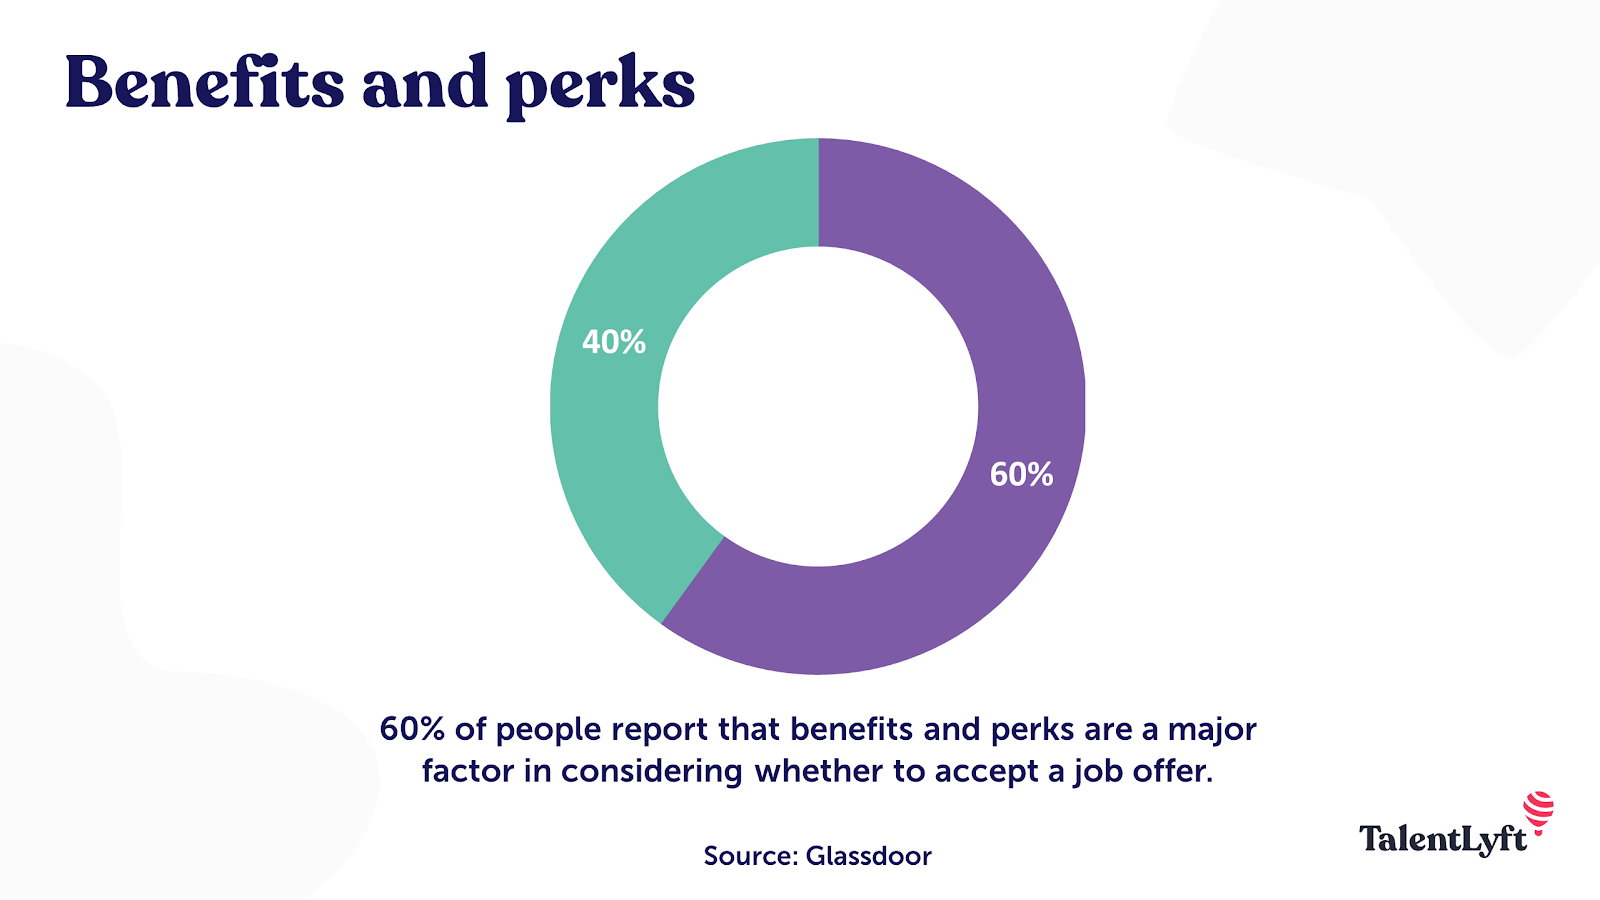 Benefits role in talent attraction